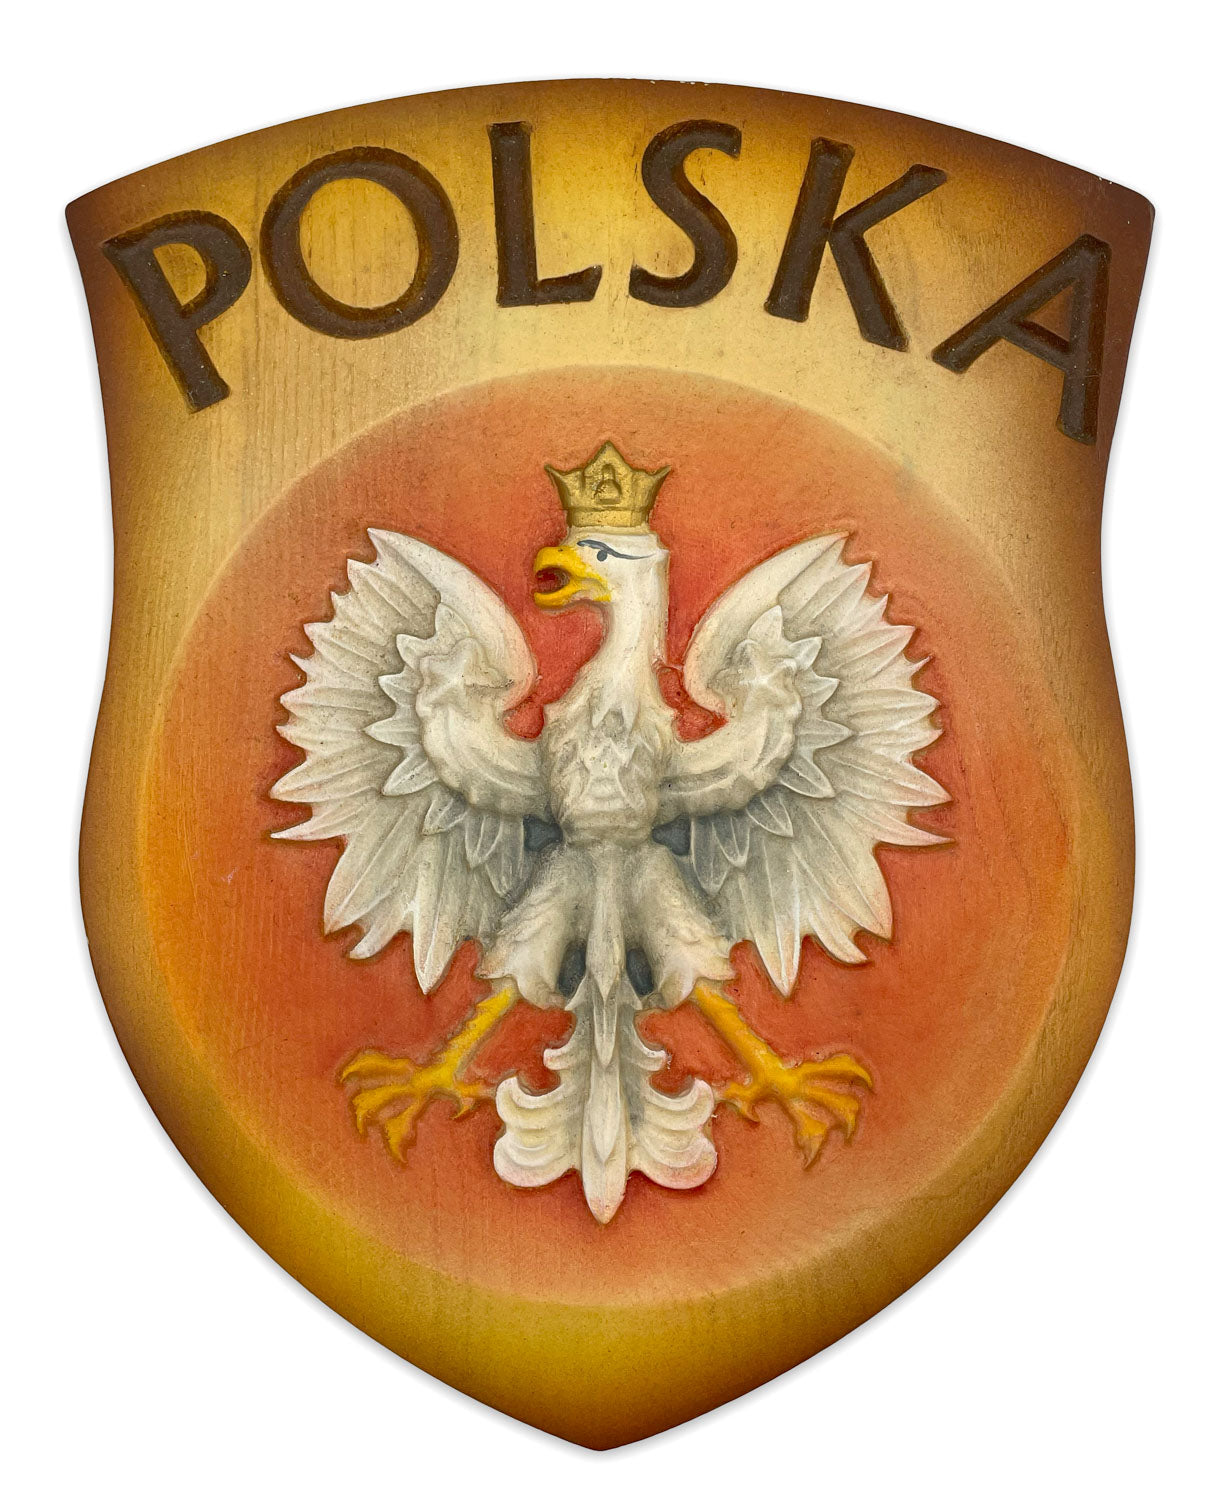 Wood Carved Coat of Arms of Poland, Large & Hollow